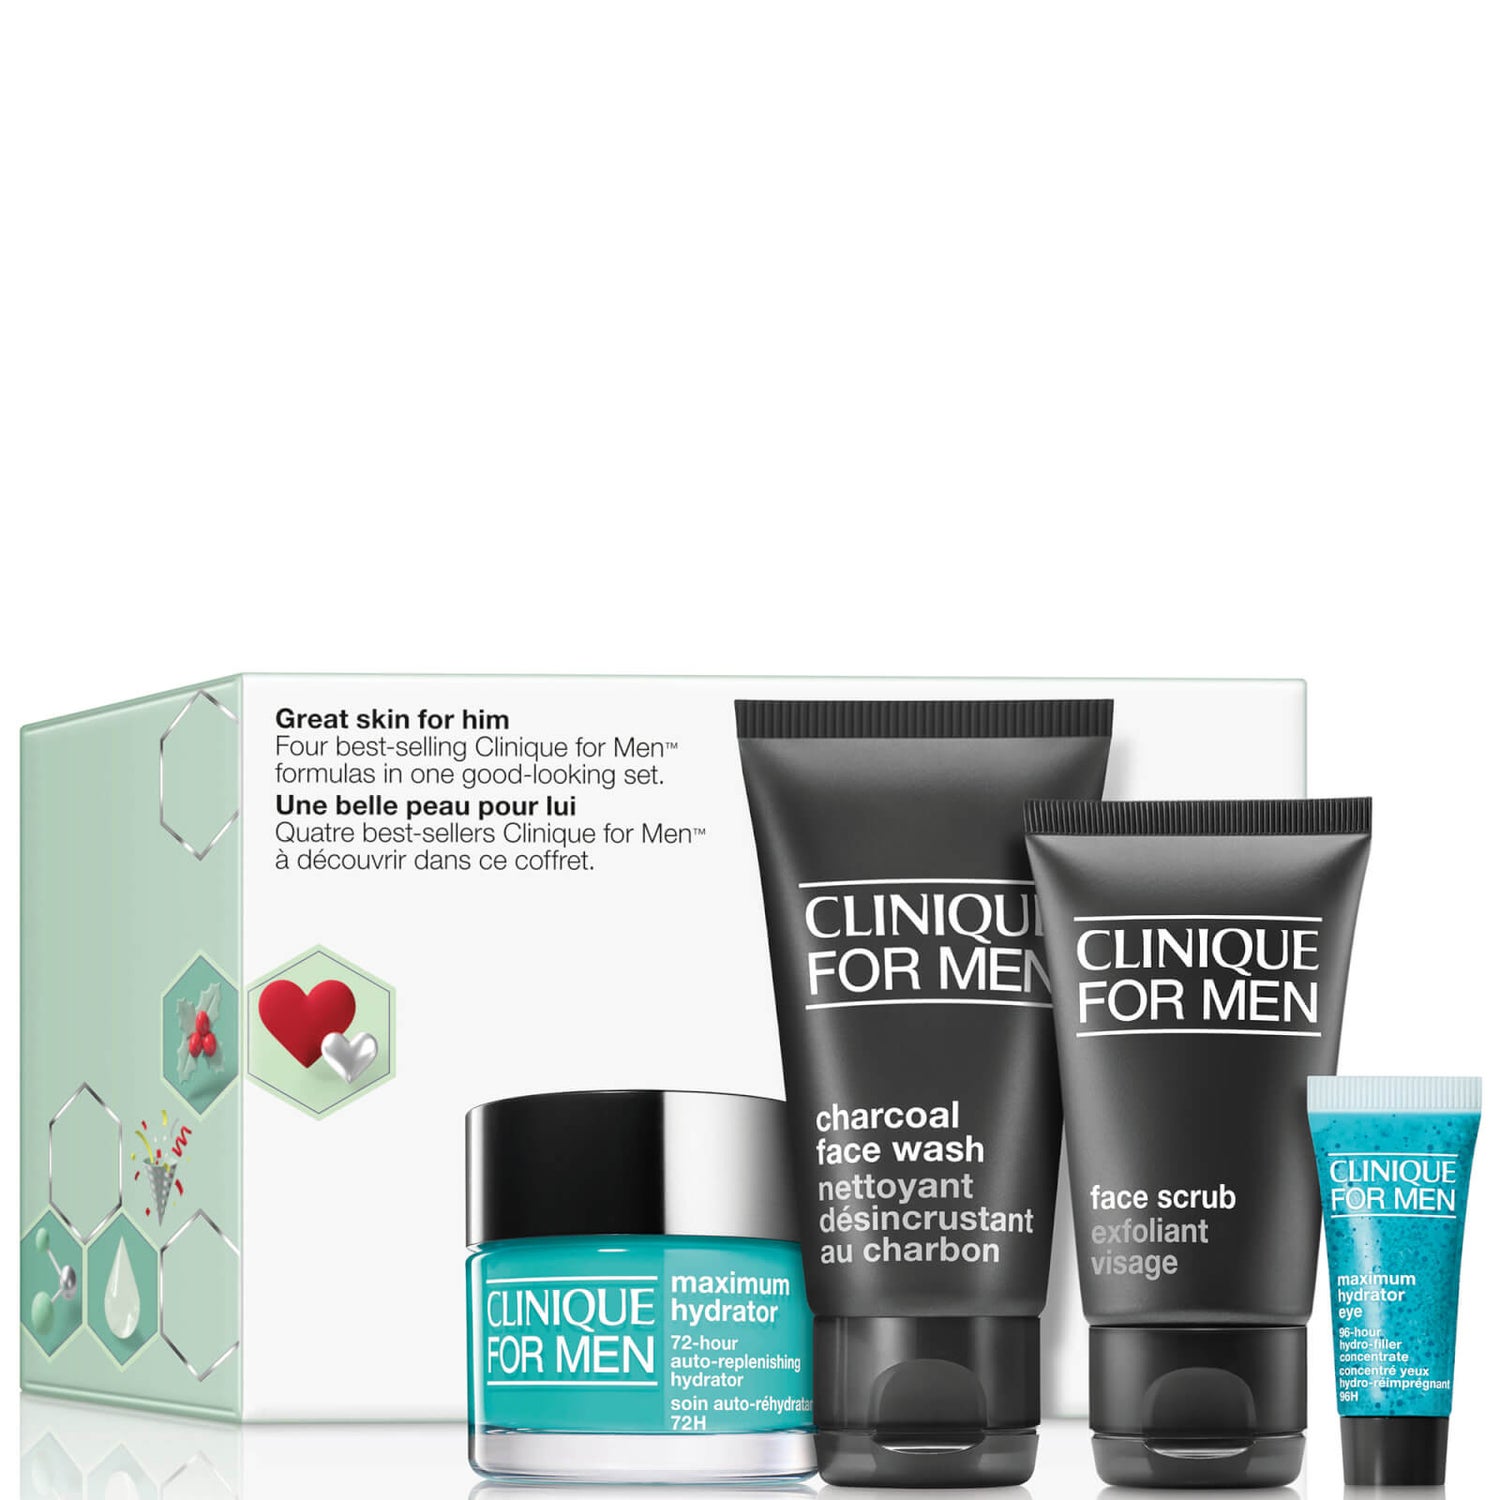 Clinique Great Skin for Him Men's Skincare Gift Set